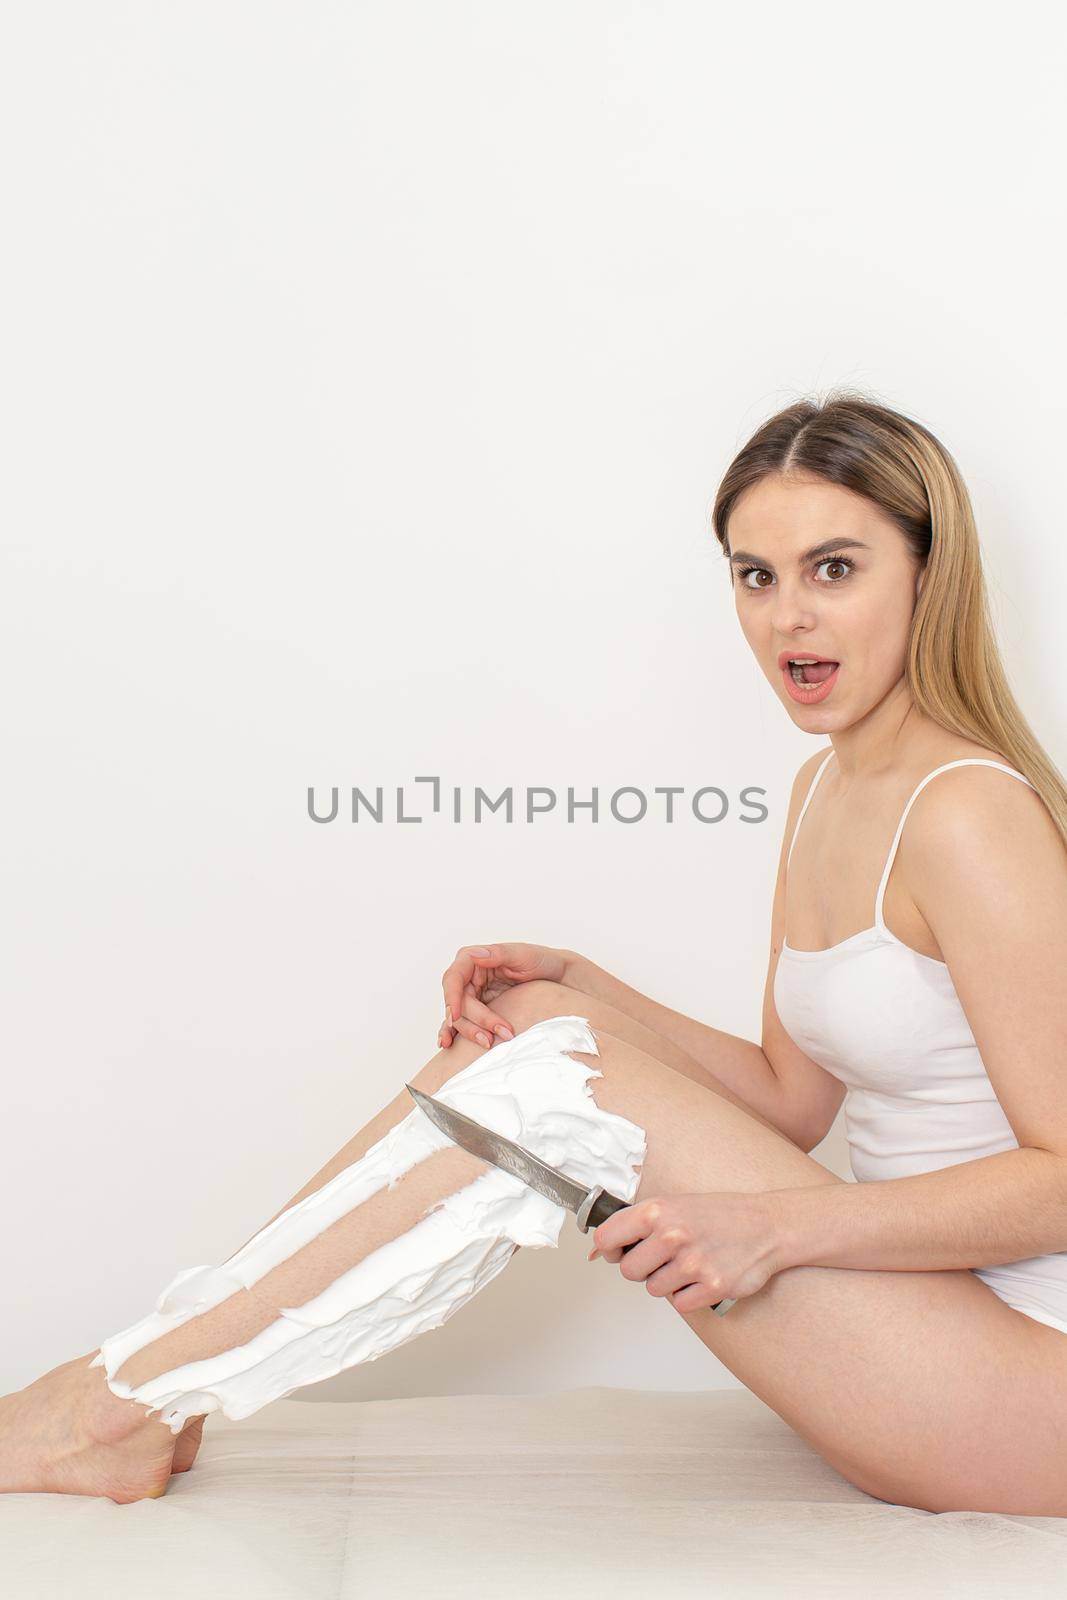 Beautiful caucasian woman shaving her legs with a knife with shaving foam on white background. Depilation and epilation concept